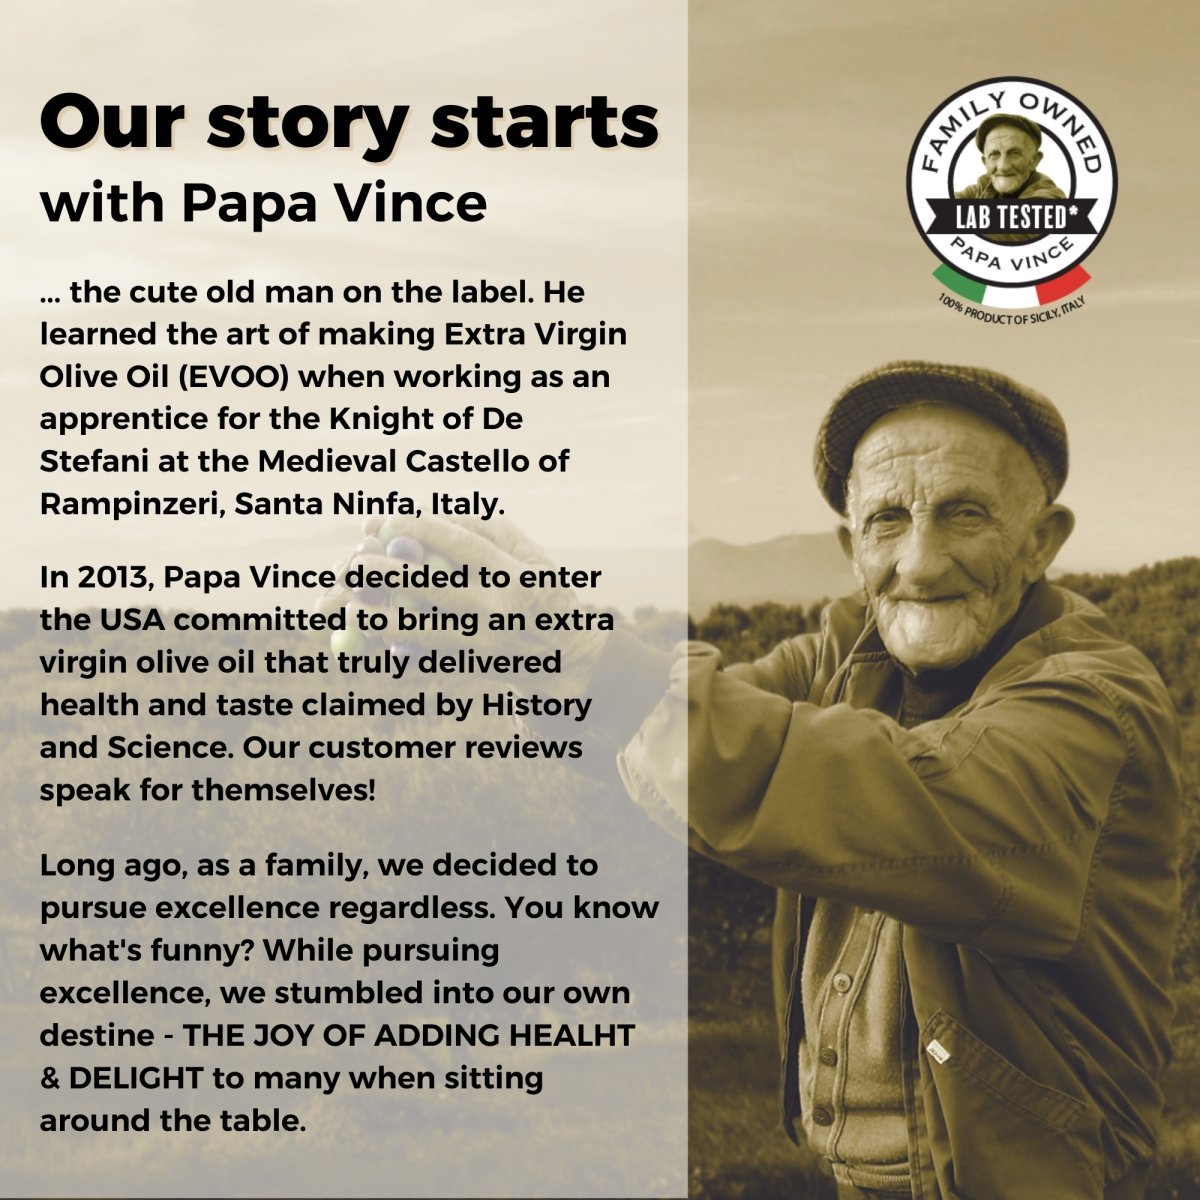 Gourmet Italian Food in Gift Box - made by our family in Italy from organic ingredients locally grown in Sicily. Authentic Pasta Texture, Genuine Tomato Sauce, Peppery EVOO bring you back to Italy - Papa Vince